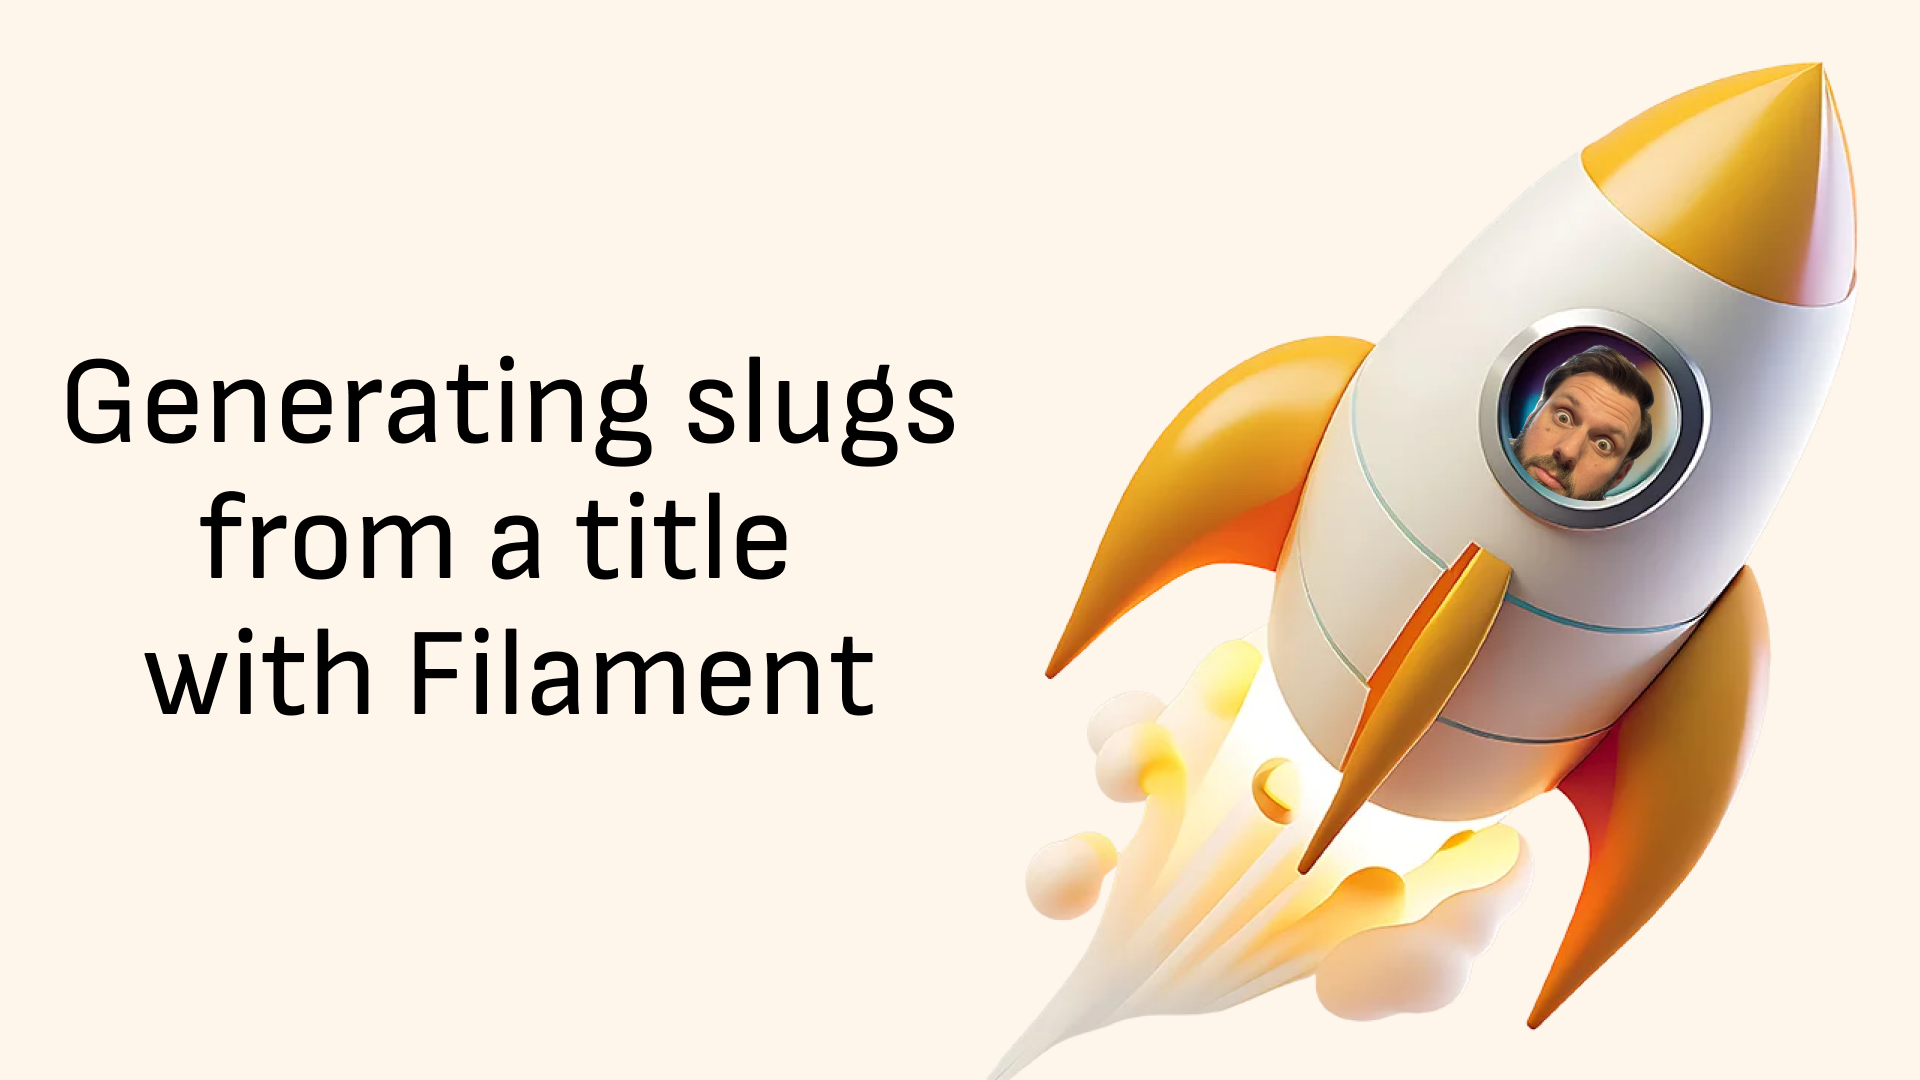 Generating slugs from a title in Filament